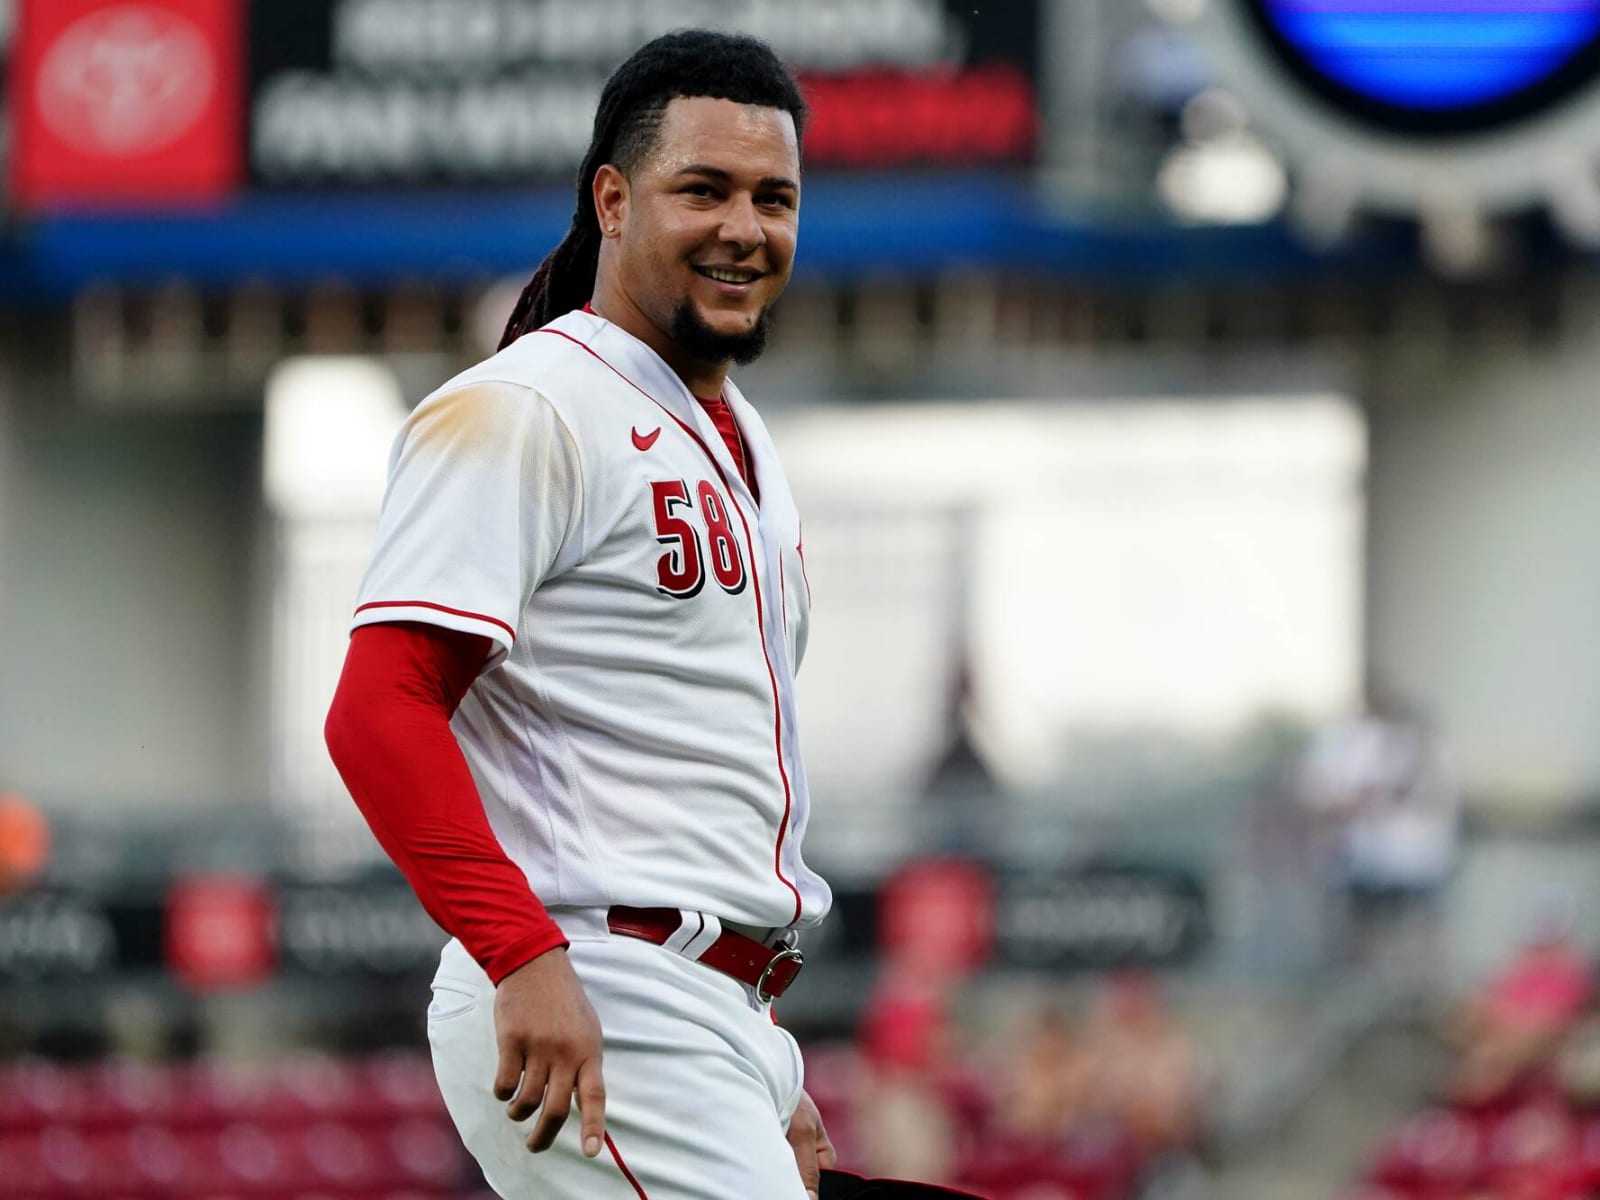 Reds news: Blockbuster trade with Mariners send Luis Castillo to Seattle